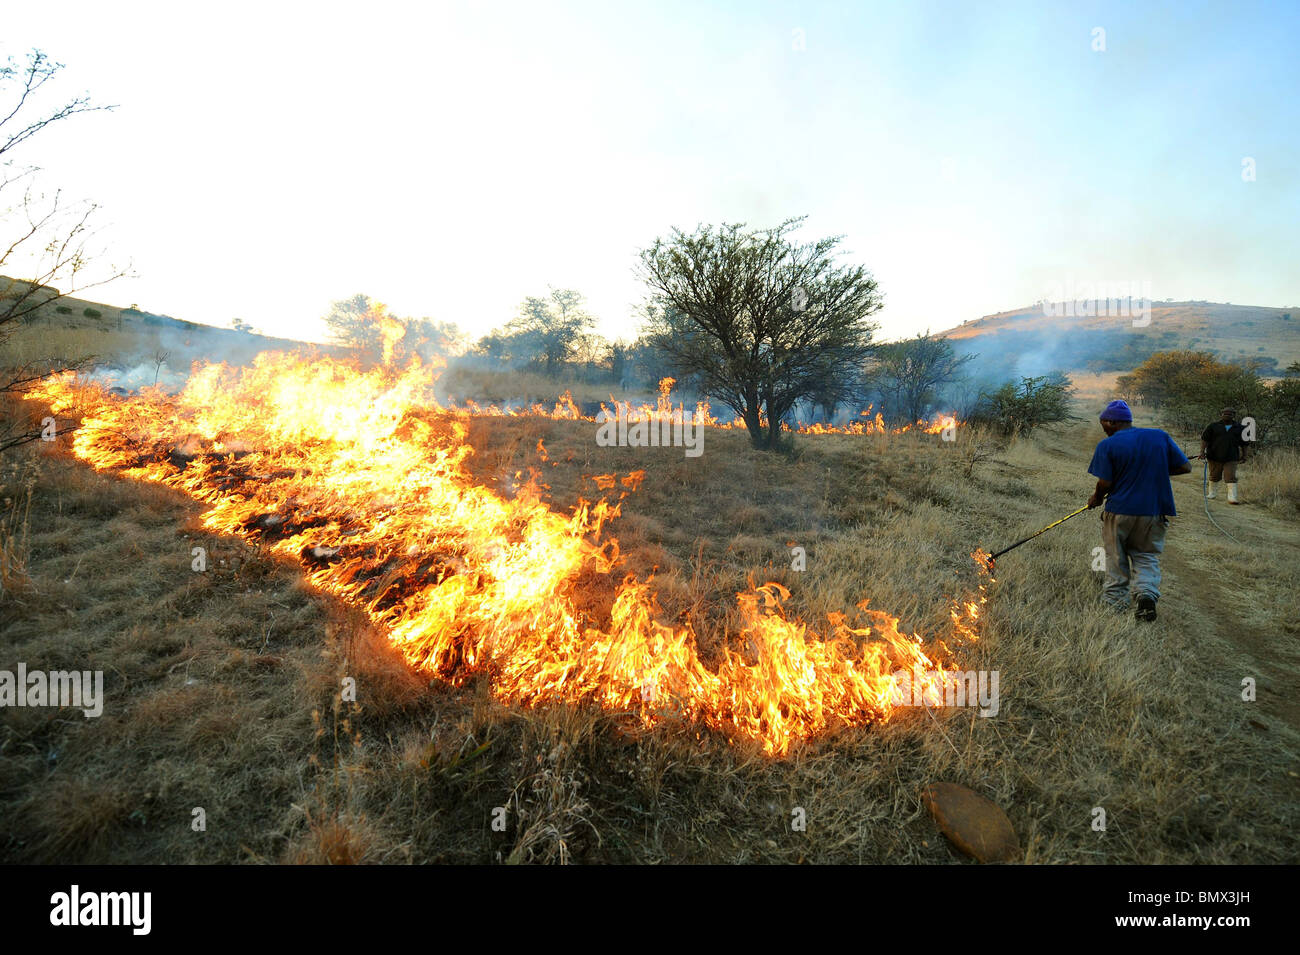 RANCH WORKERS CREAT FIREBREAKS 2010 FIFA WORLD CUP SOUTH AFRI KARMA RANCH  SOUTH AFRICA 21 June 2010 Stock Photo